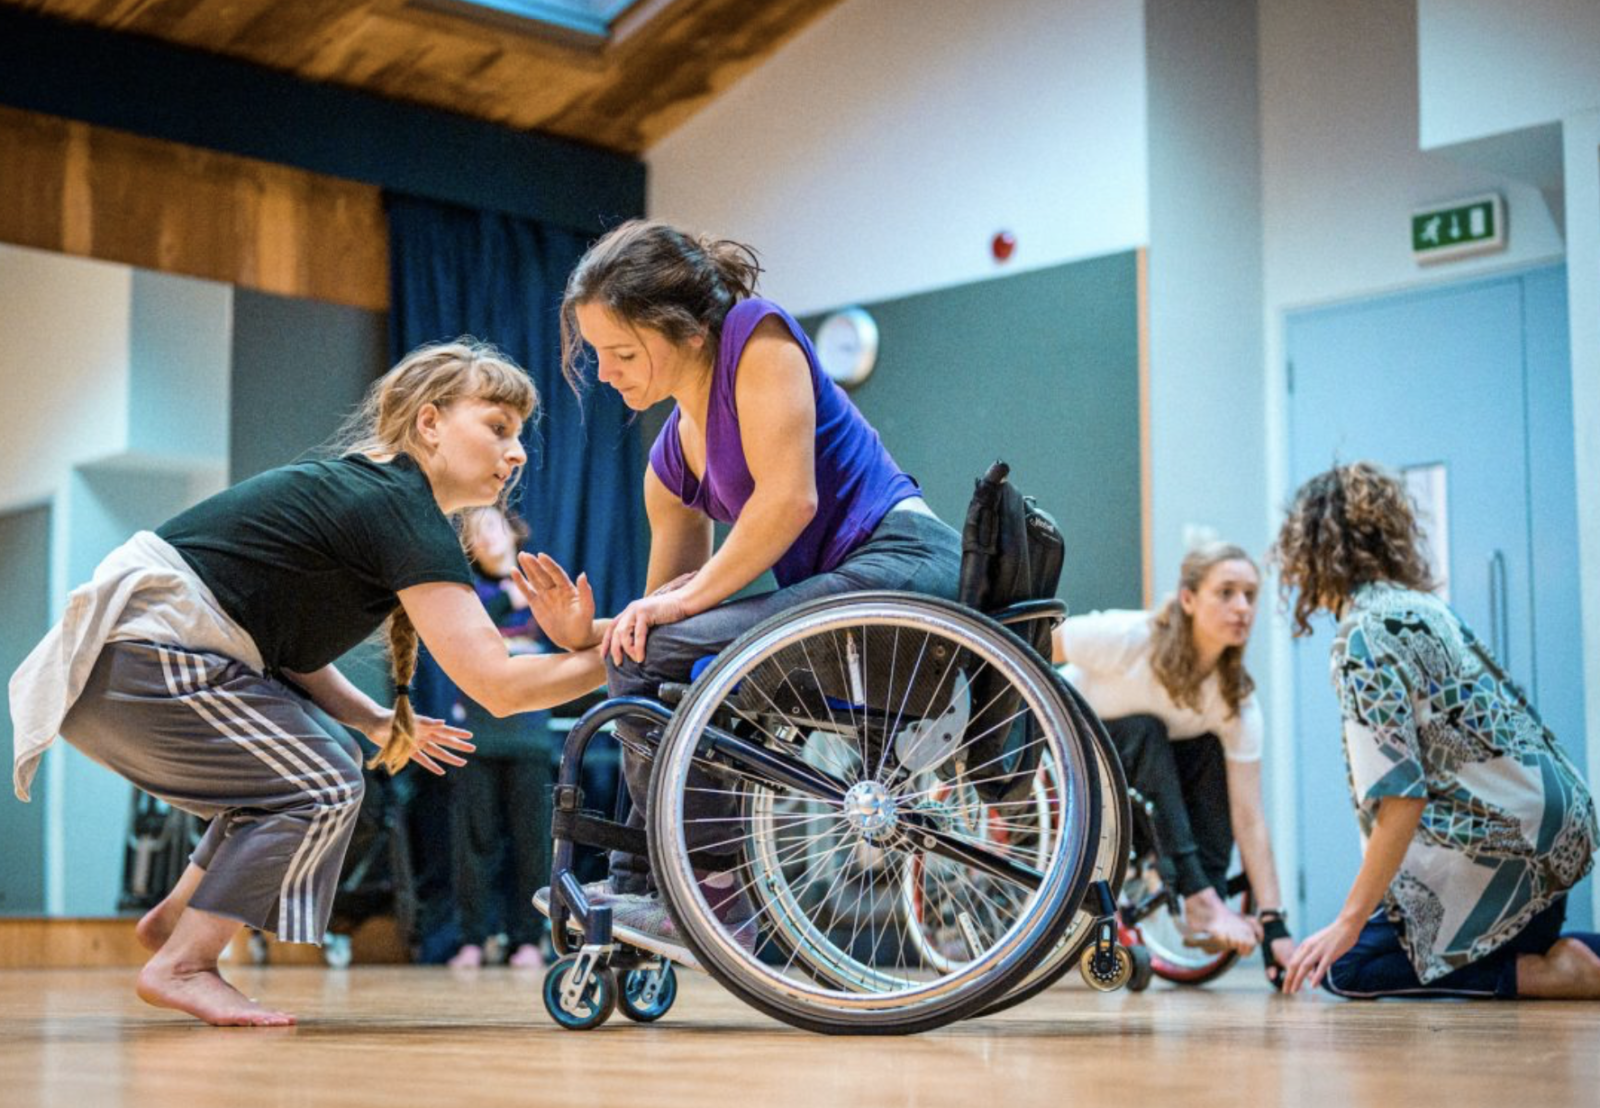 A studio shot of a dancer in a wheelchair opposite an able bodied dancer with their arms intertwined. In the background other dancers are interacting with one another in the studio space.